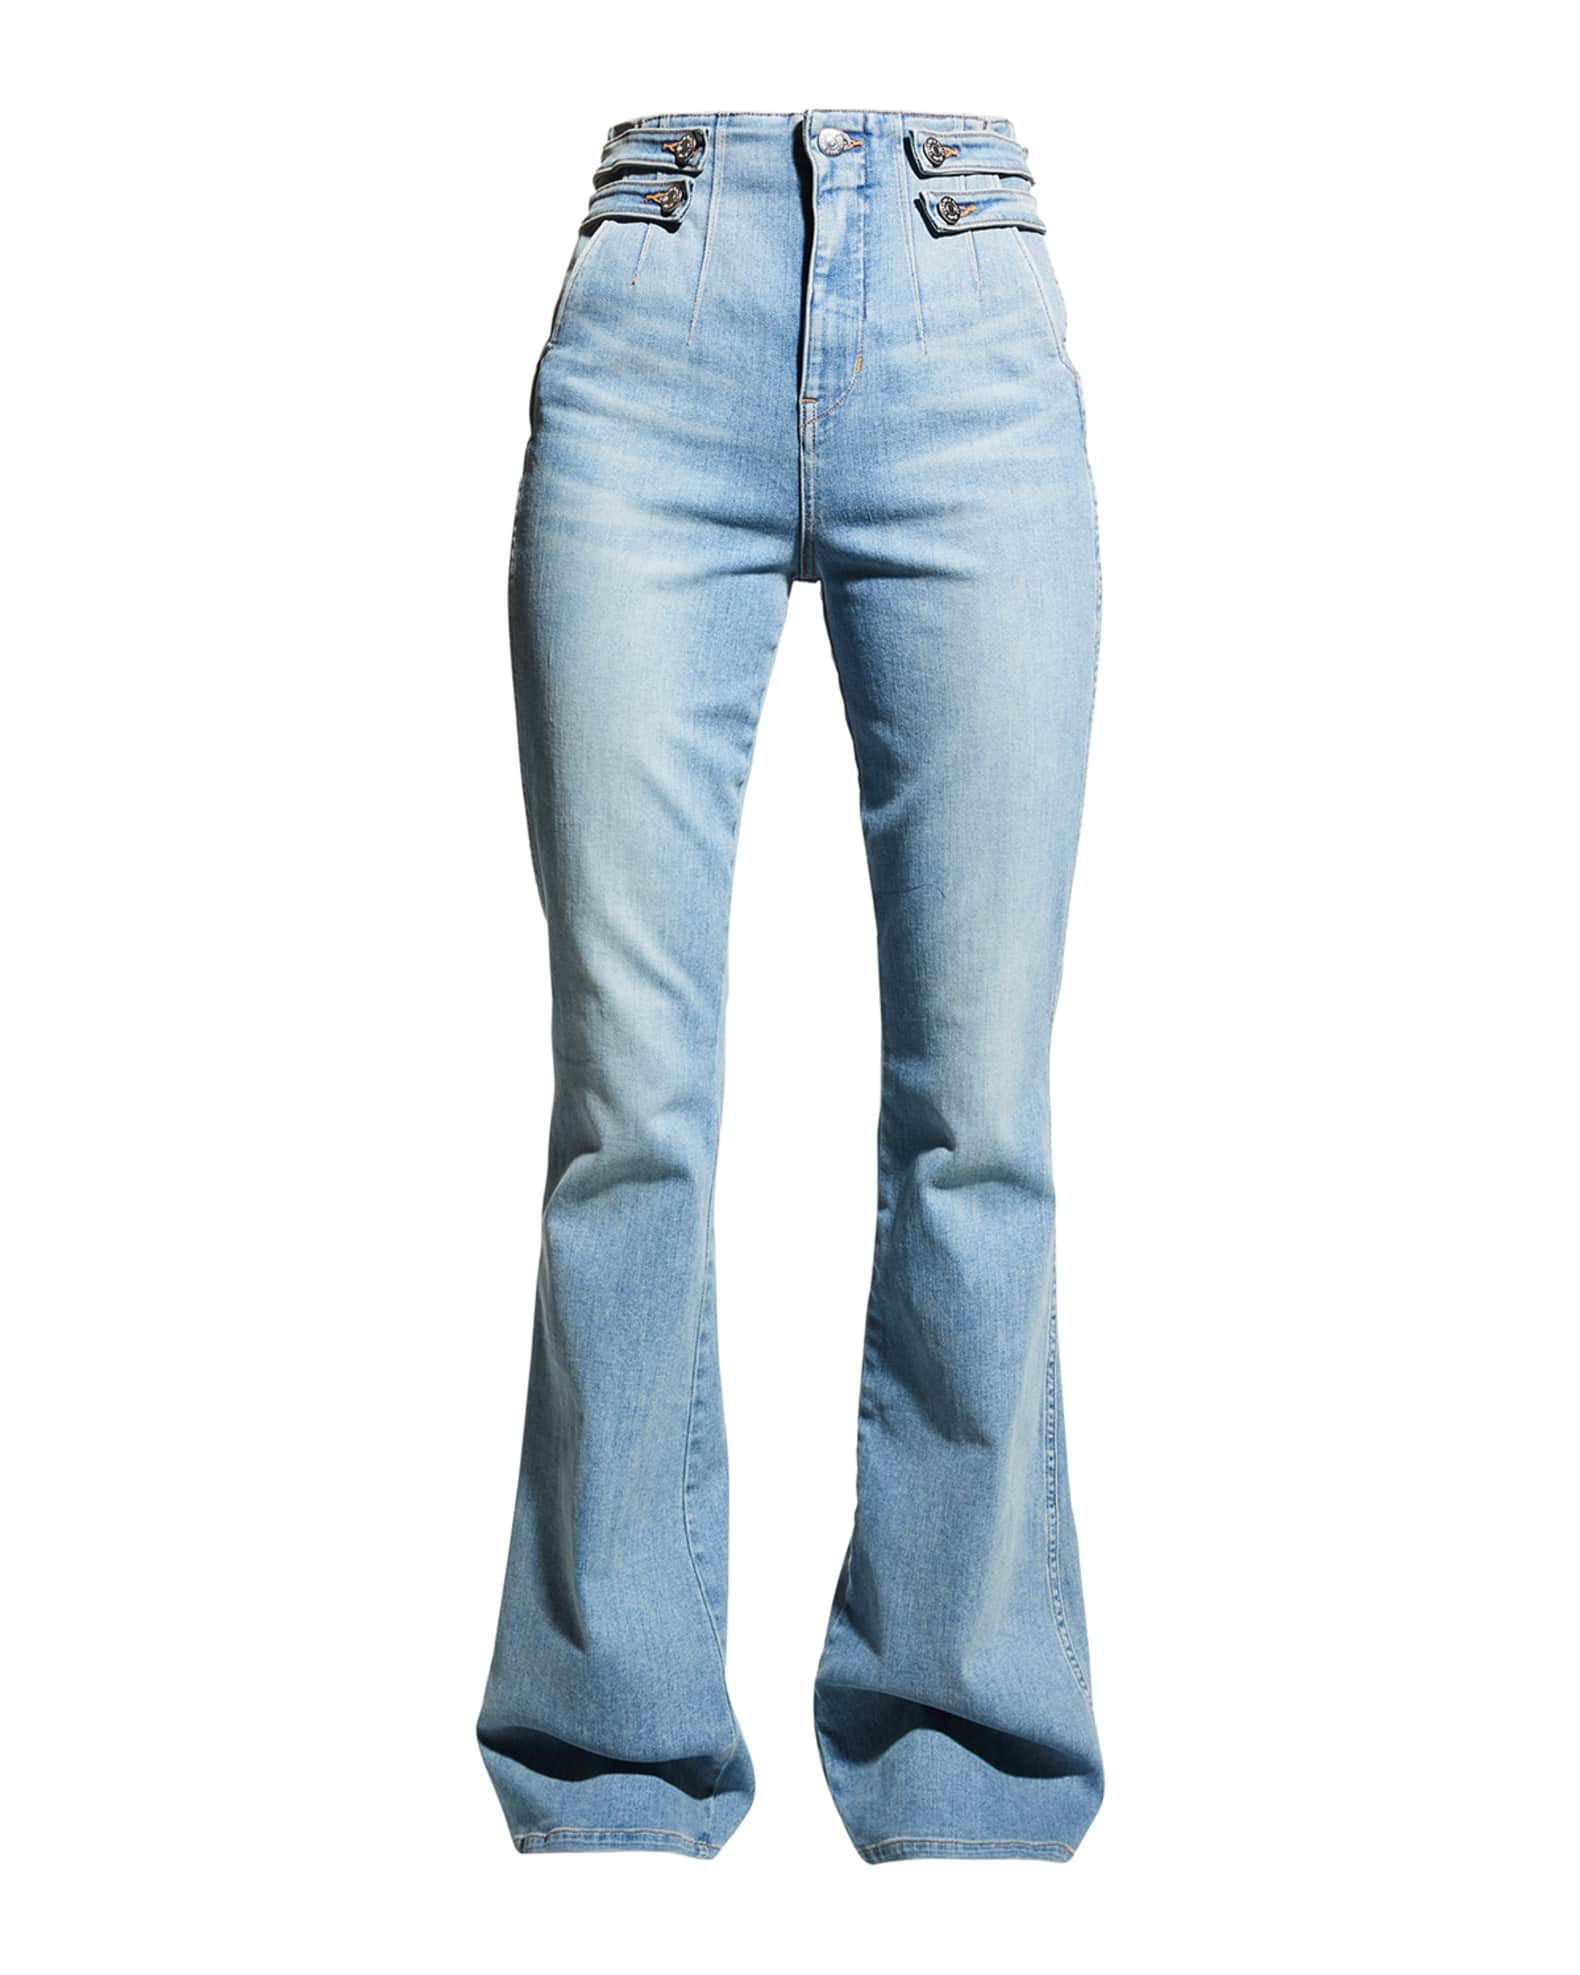 Veronica Beard Jeans Beverly High-Rise Flare Jeans | Neiman Marcus